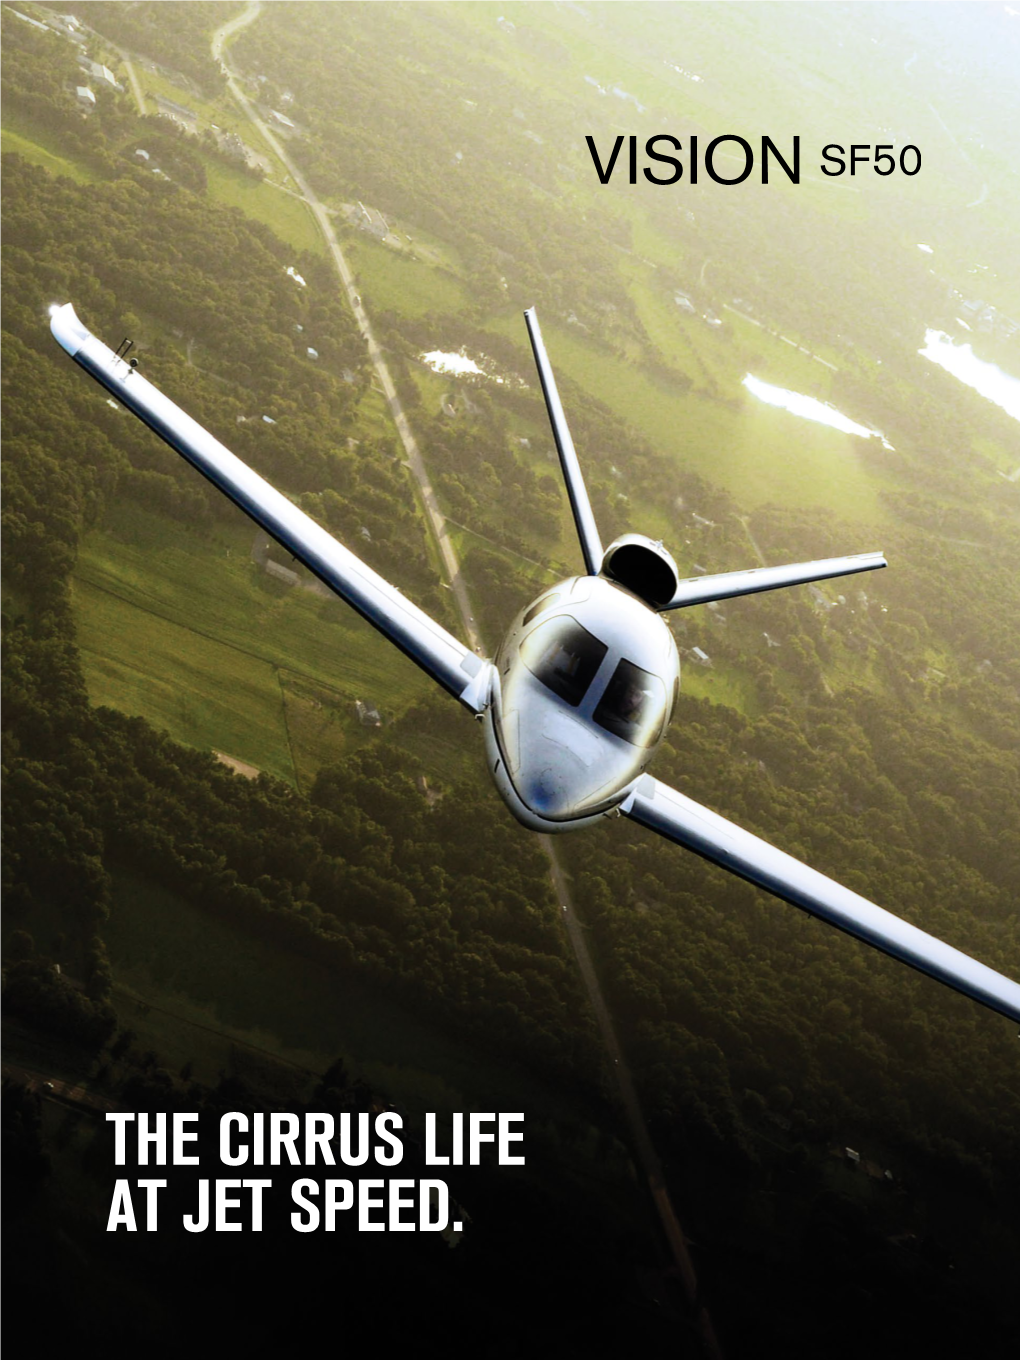 The Cirrus Life at Jet Speed. Introducing the New Jet Age